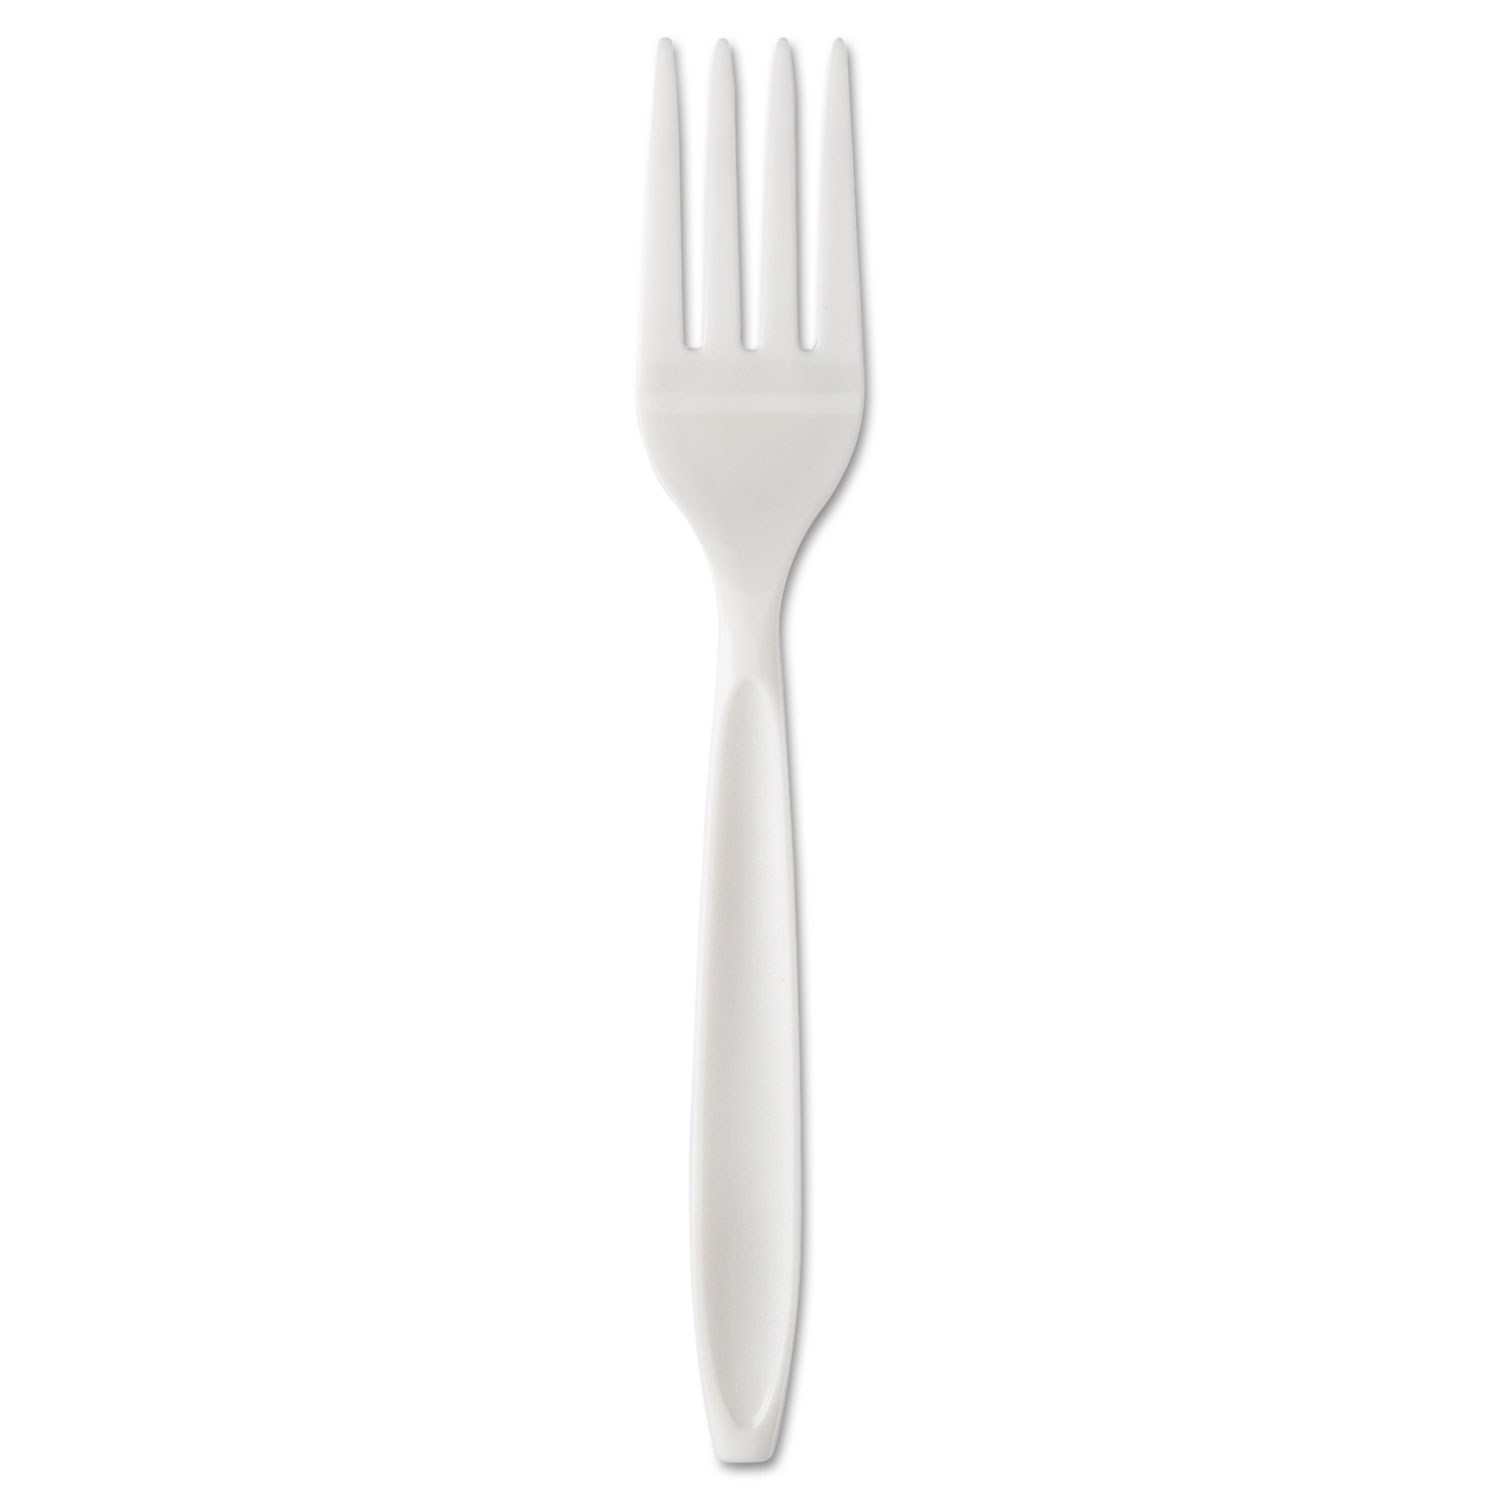  Dart RSW1-0007 Individually WraPolypropyleneed Reliance Medium Heavy Weight Cutlery, Fork, White, 1000/CT (SCCRSW1) 